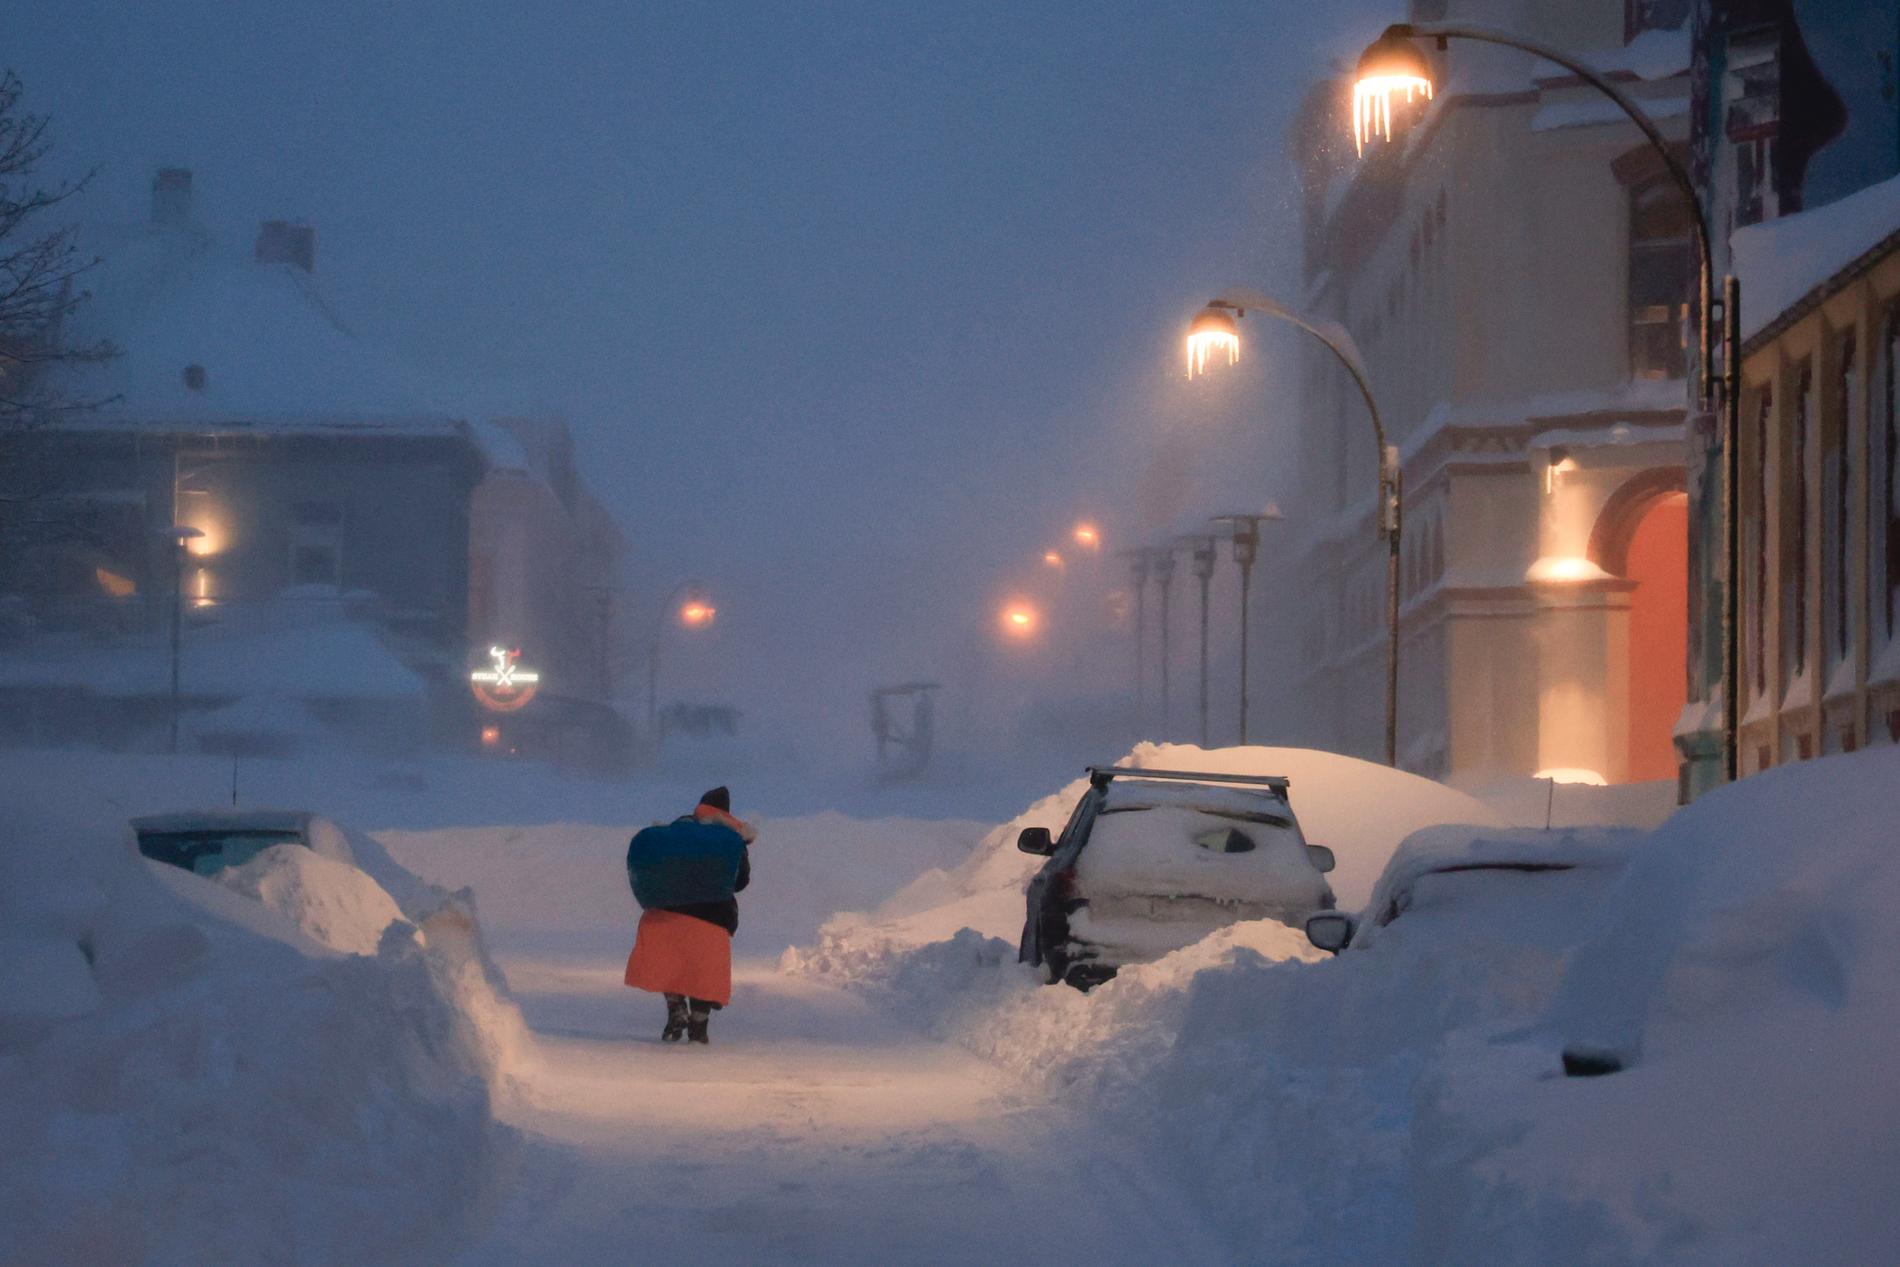 Winter Storm Chaos in Kristiansand: Buses Cancelled, Schools Closed, and Road Conditions Dangerous